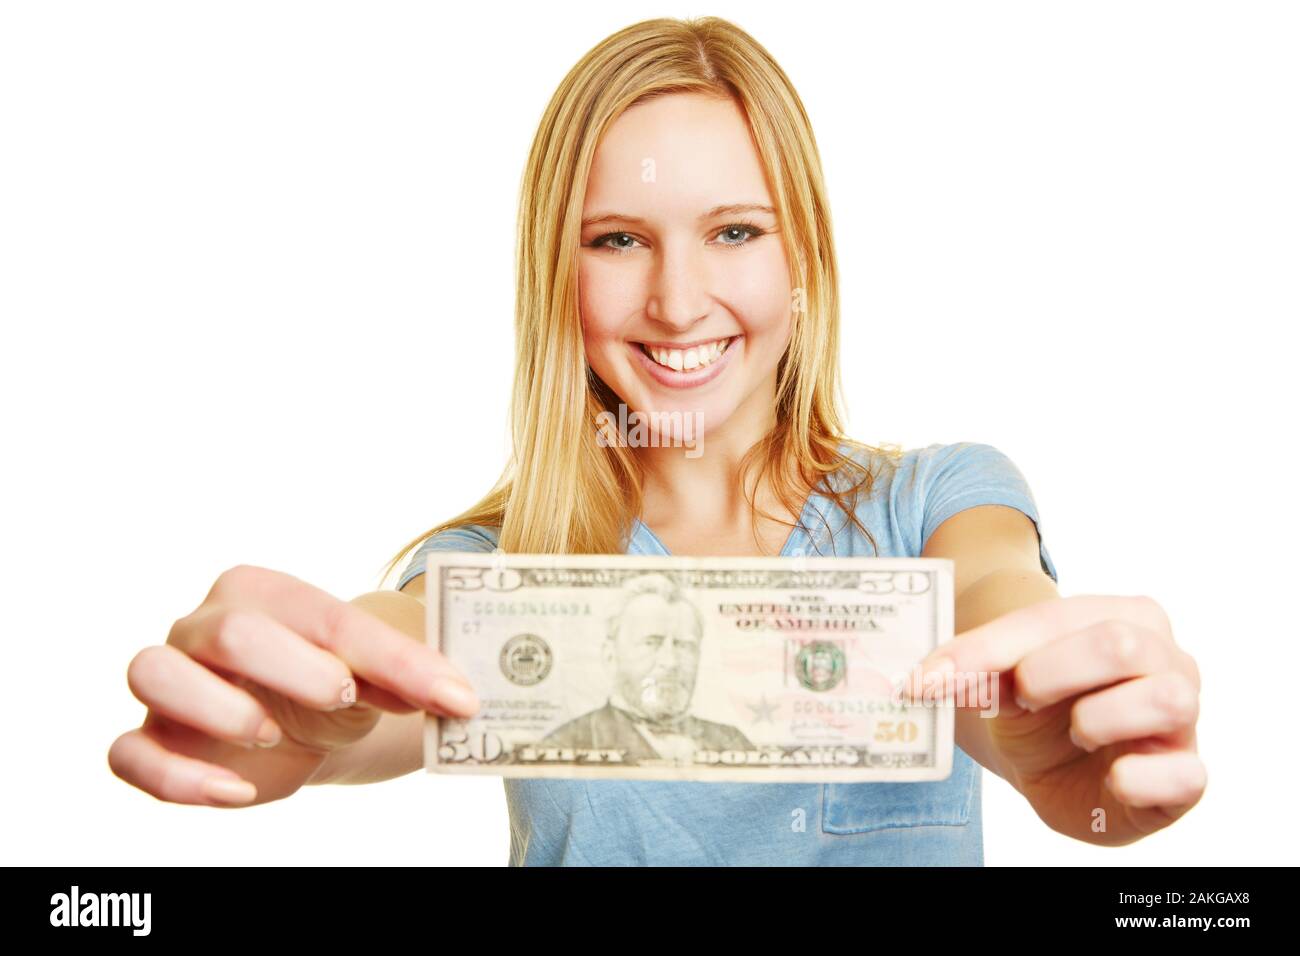 Laughing blonde woman holds a 50 dollar bill at the camera Stock Photo